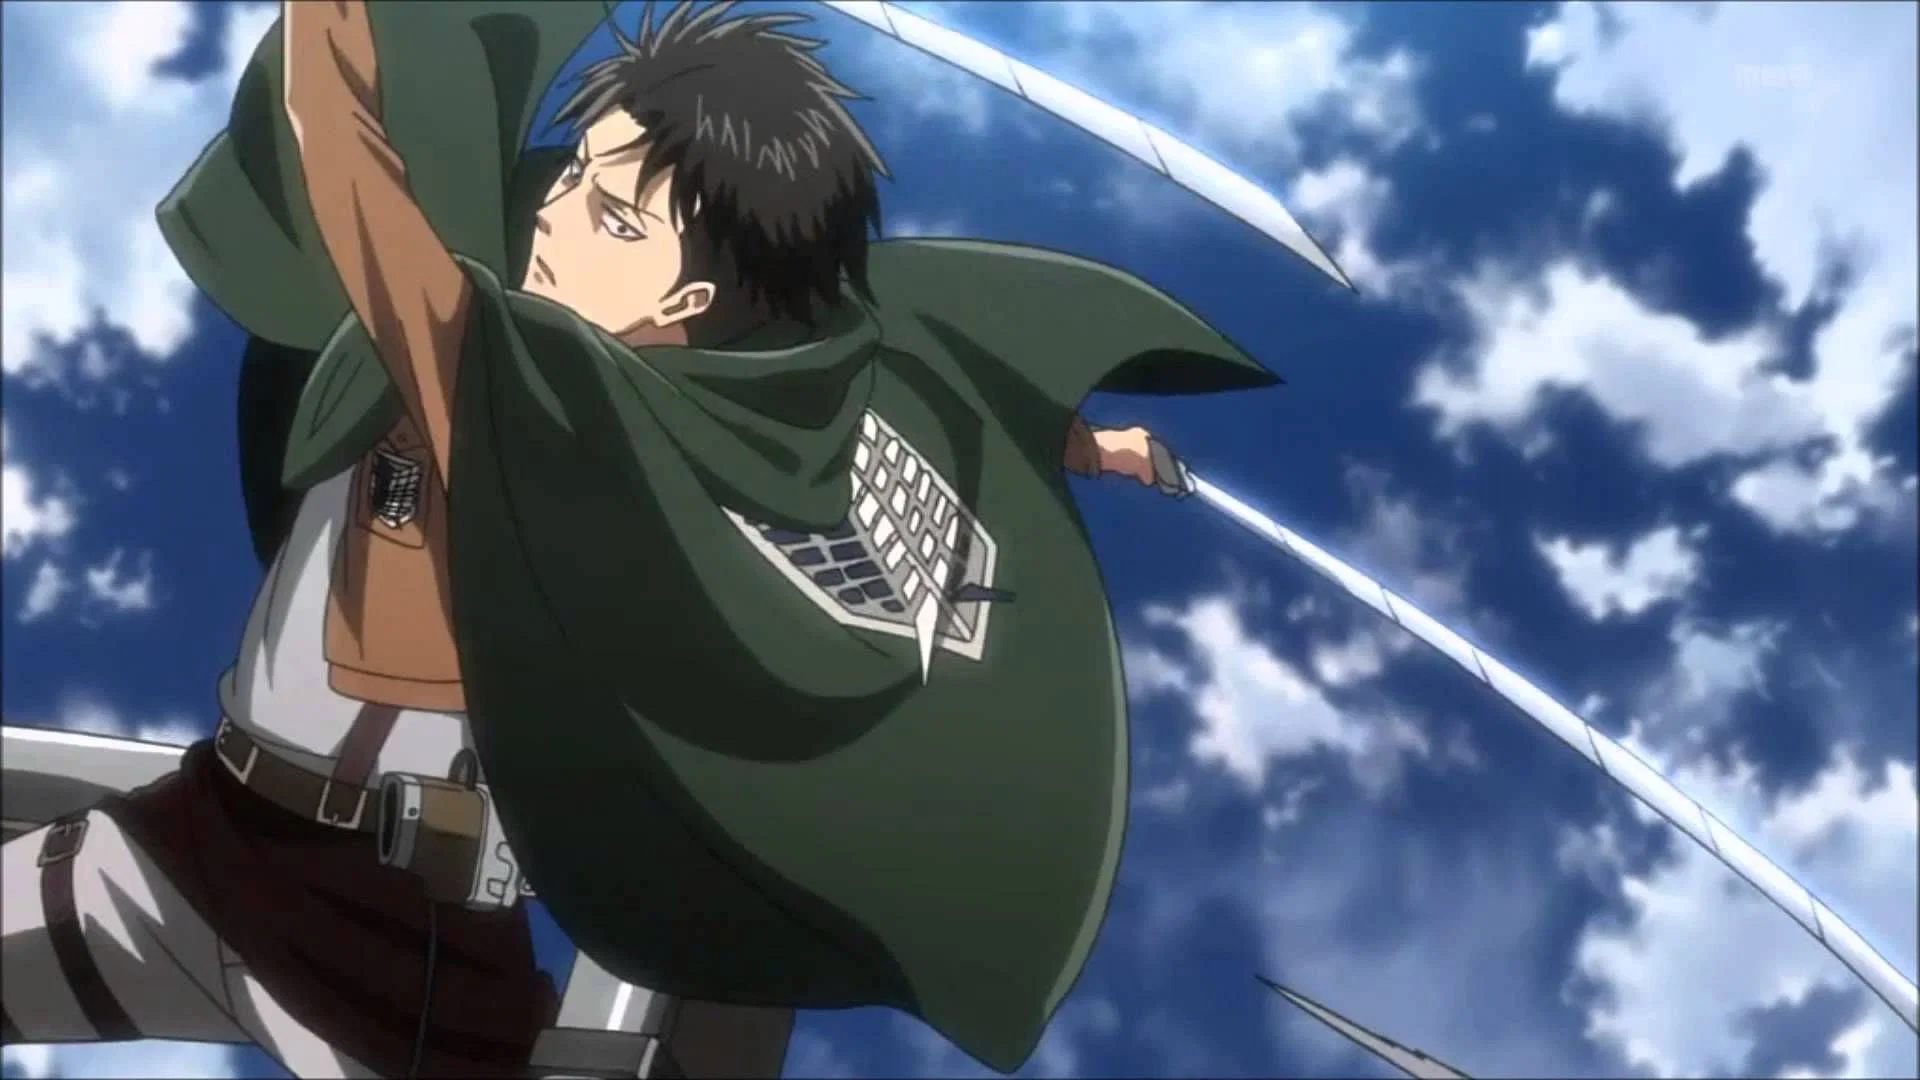 Attack on Titan Levi's Legacy as Humanity's Strongest Soldier